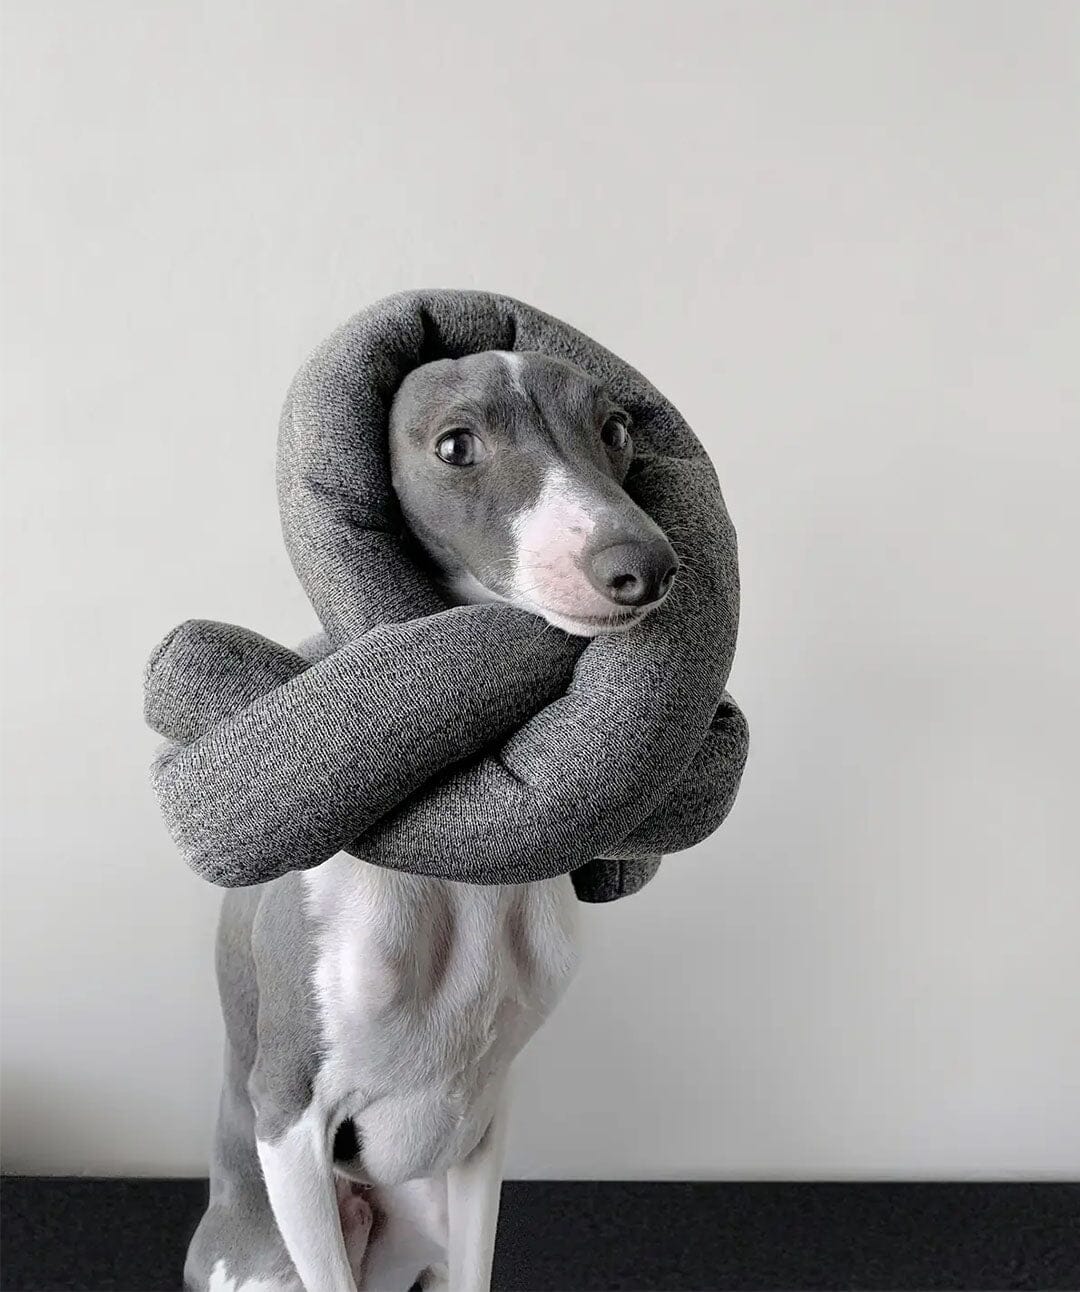 A dog with a treat knot toy tied on its head like a hat